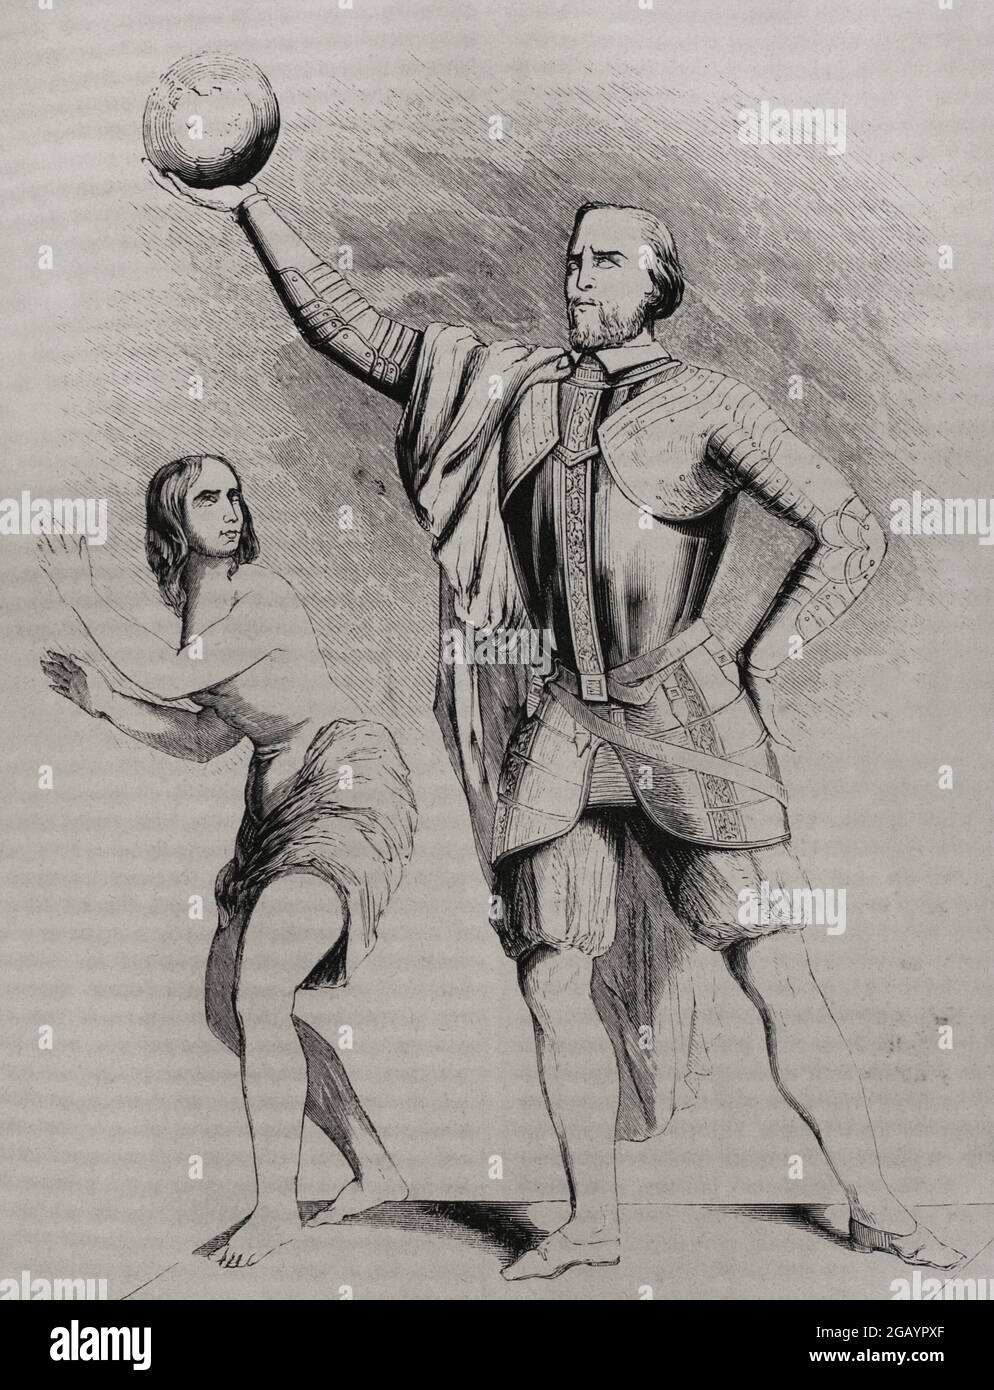 Christopher Columbus (1451-1506). Navigator, cartographer and admiral. He served the Crown of Castile. Discoverer of America in 1492. Allegorical engraving. Las Glorias Nacionales, 1853. Stock Photo